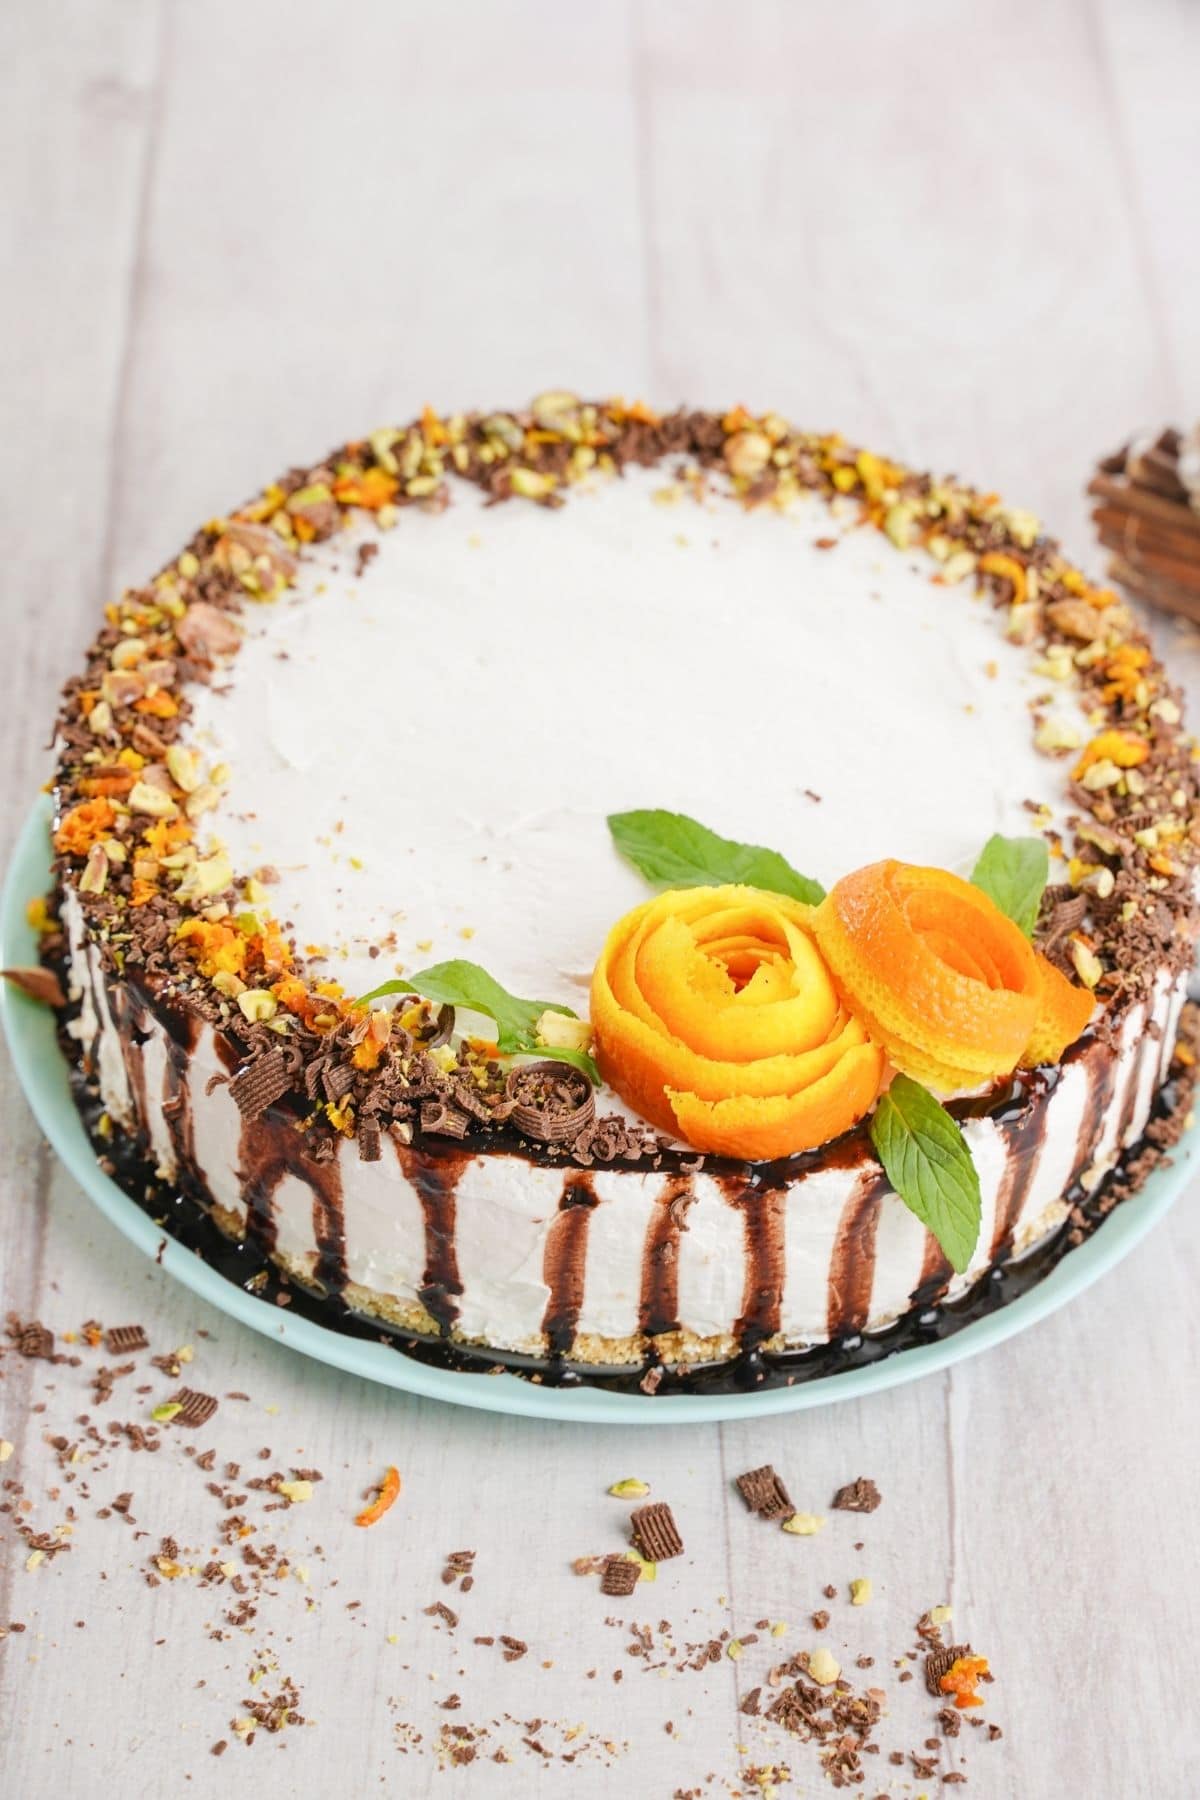 Whole cake topped with orange roses on teal plate on white table